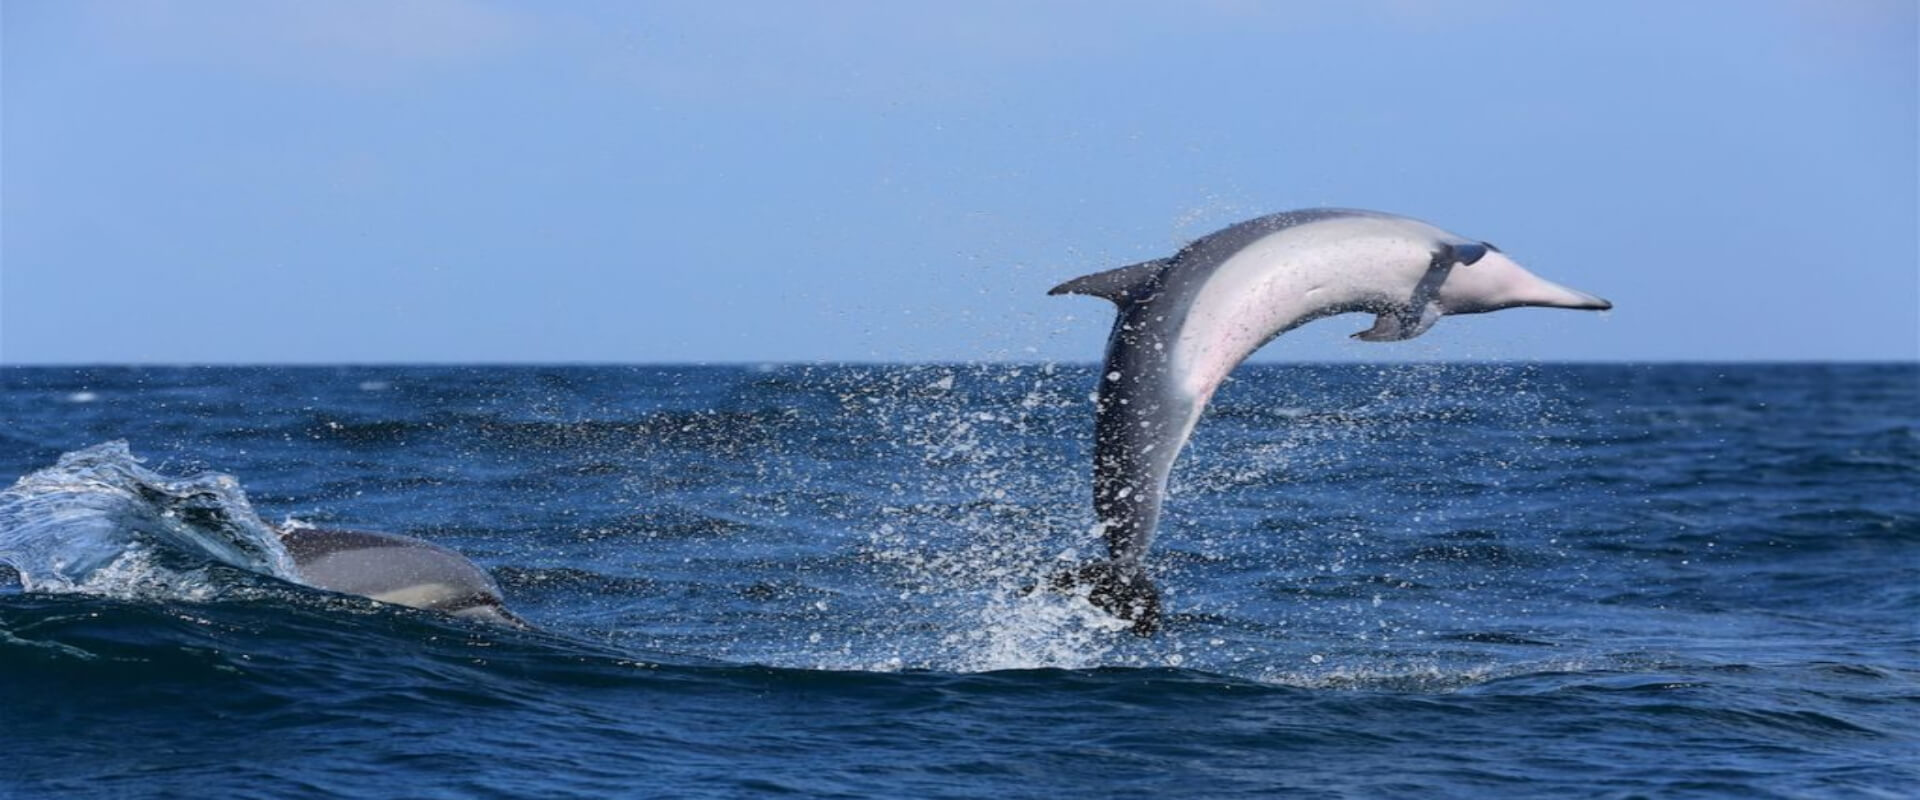 Dolphin and Whale Watching Tour | Costa Rica Jade Tours